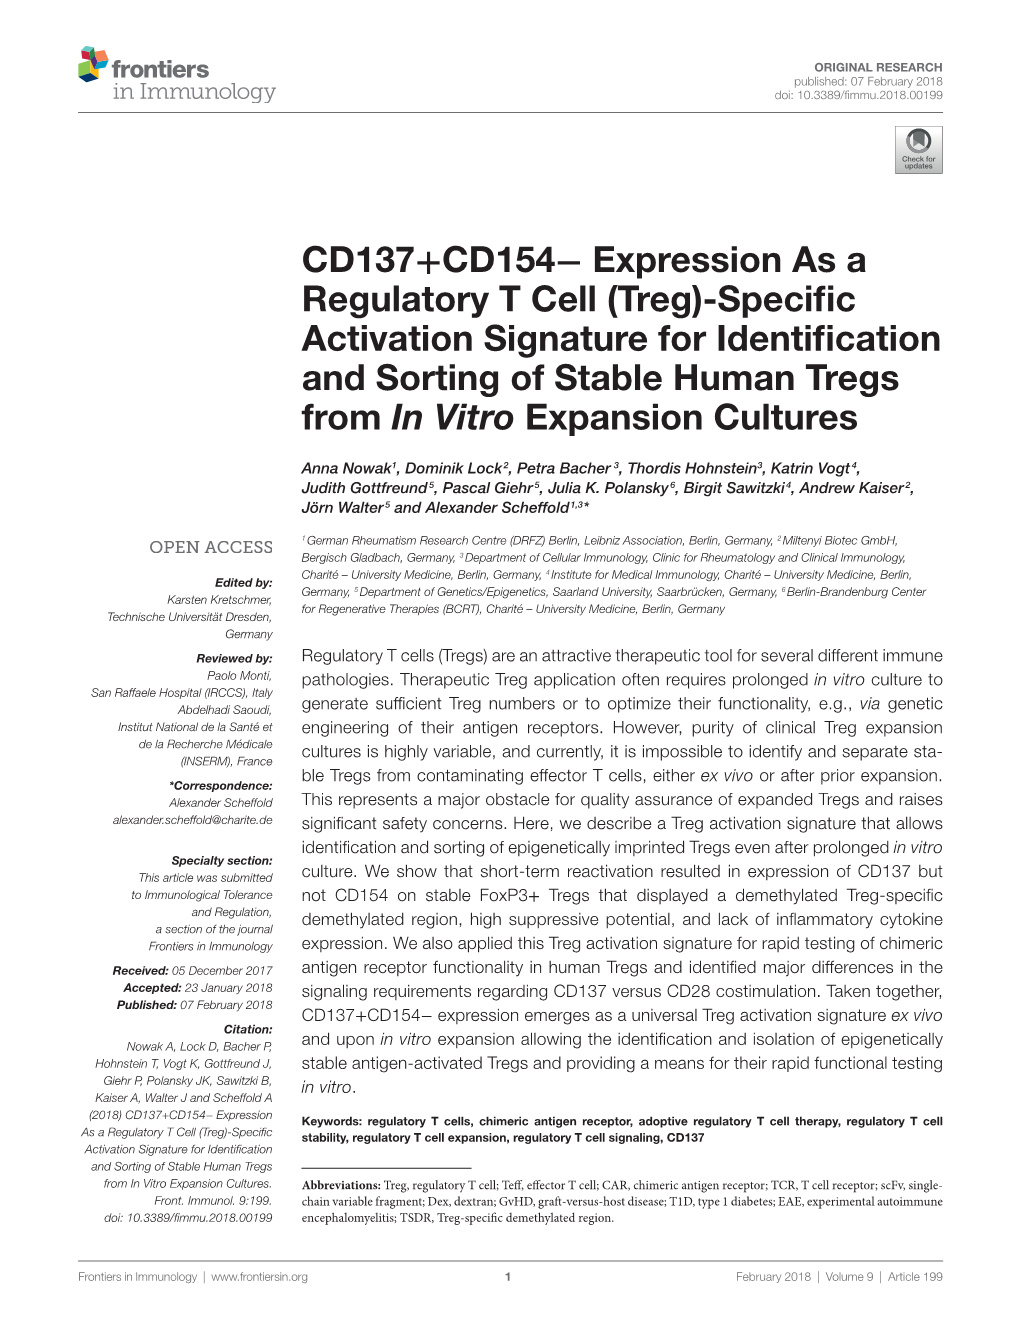 CD137+CD154− Expression As a Regulatory T Cell (Treg)